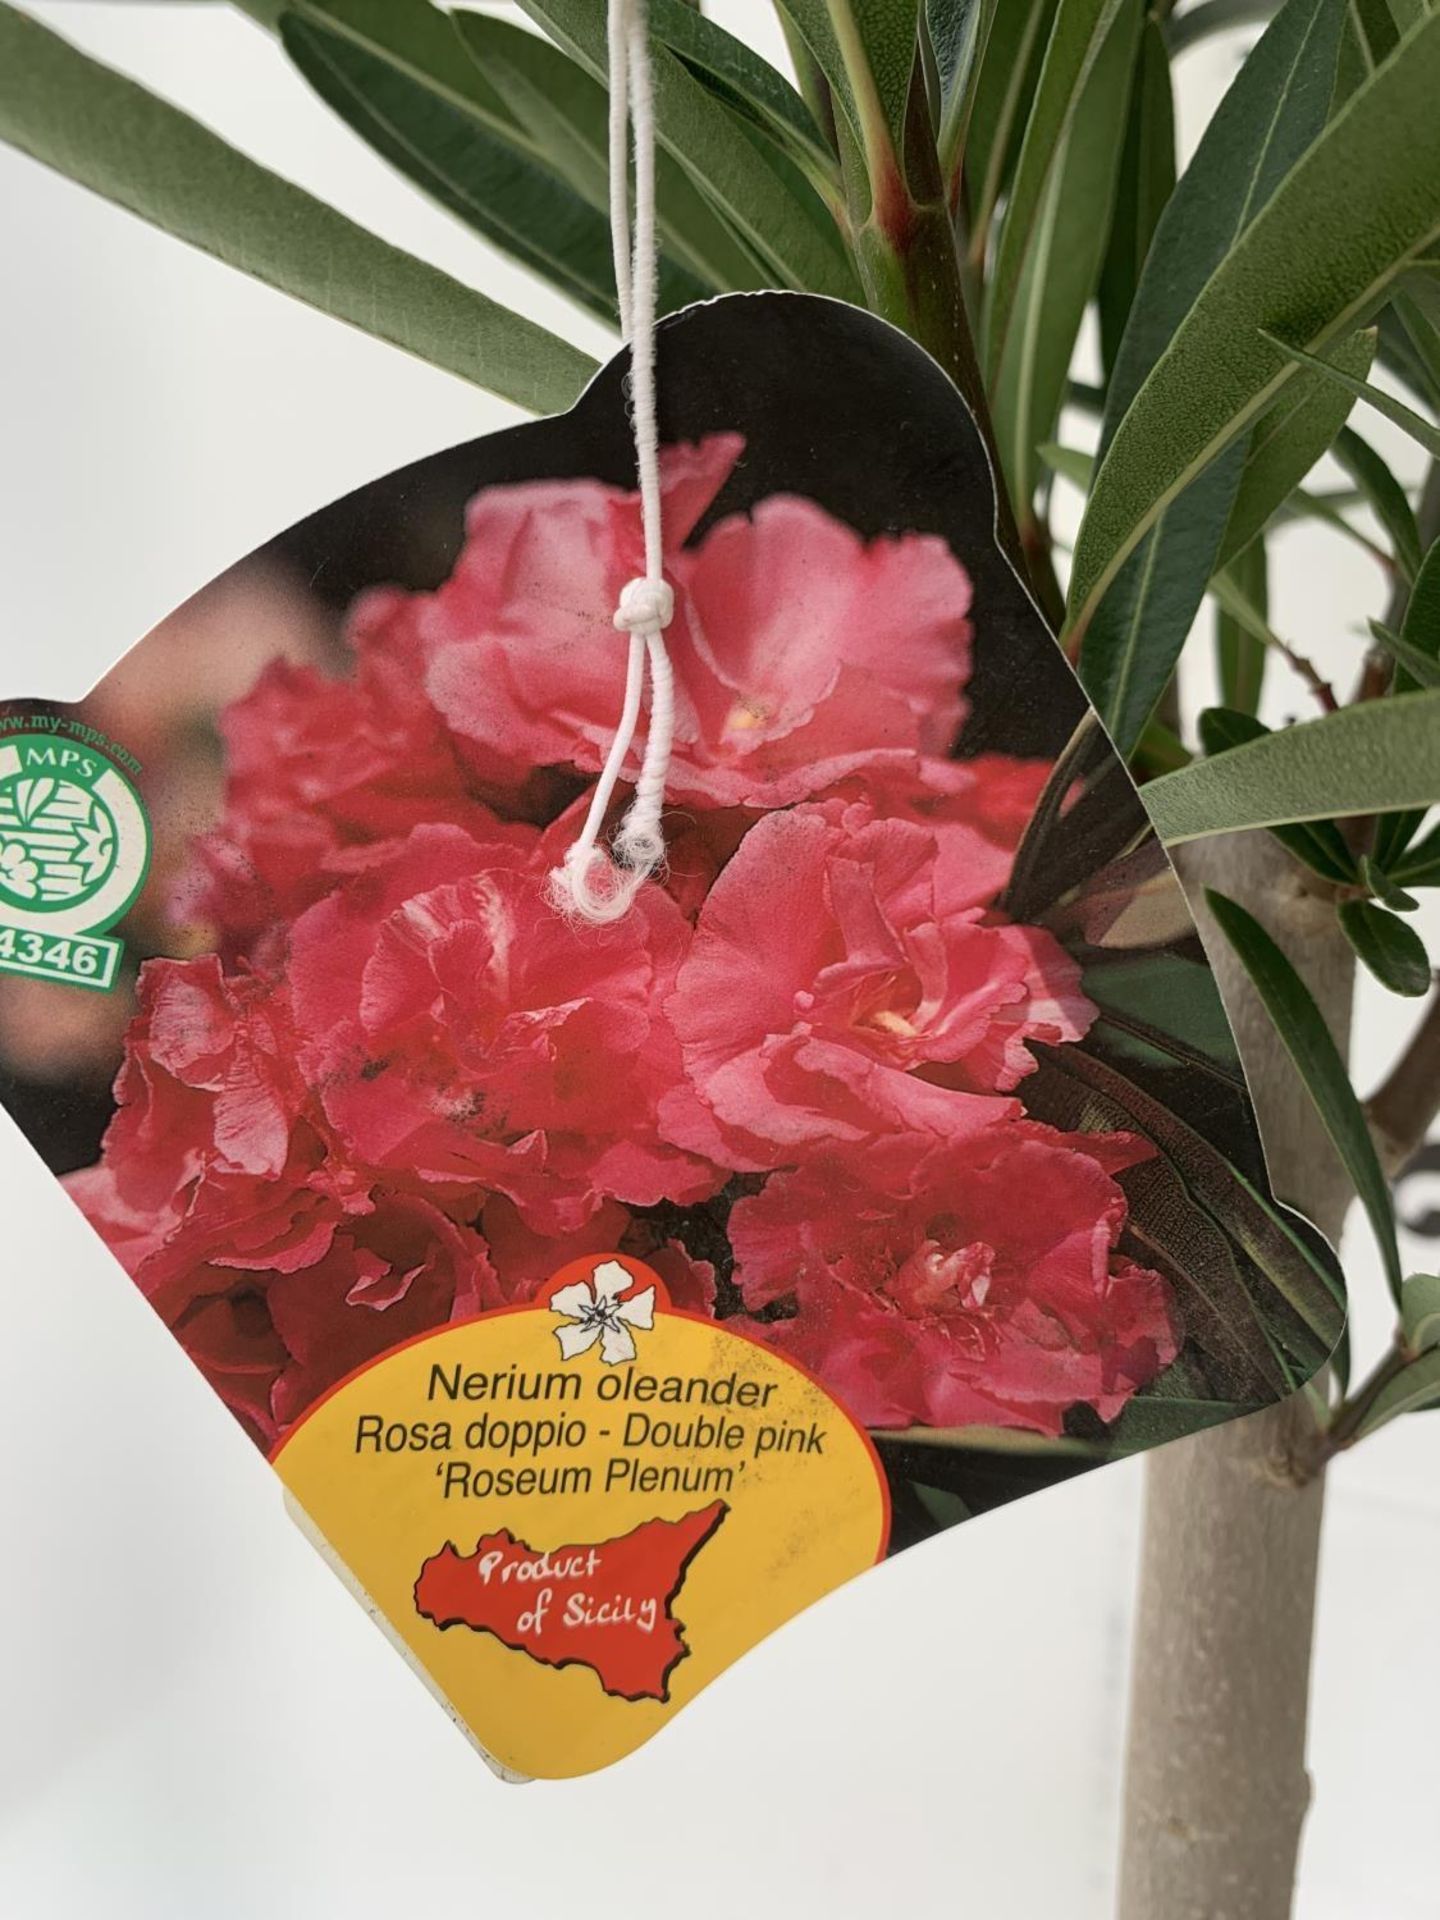 TWO NERIUM OLEANDER STANDARD TREES 'DOUBLE PINK' APPROX 110CM IN HEIGHT IN 4 LTR POTS PLUS VAT TO BE - Image 4 of 4